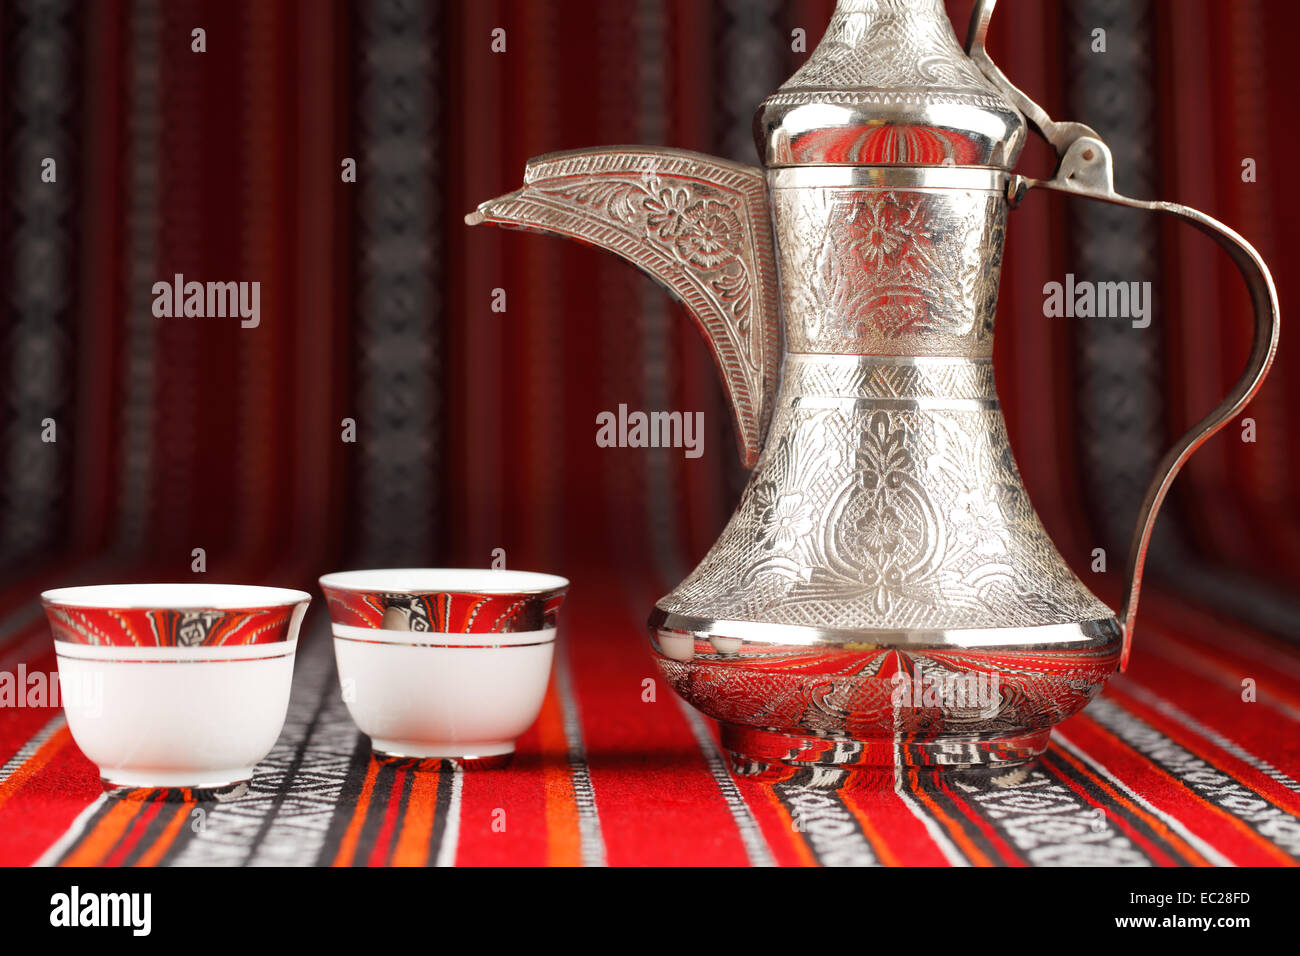 Ornate Arabian tea cups and a dallah are placed on traditional red fabric from the Gulf region. Stock Photo